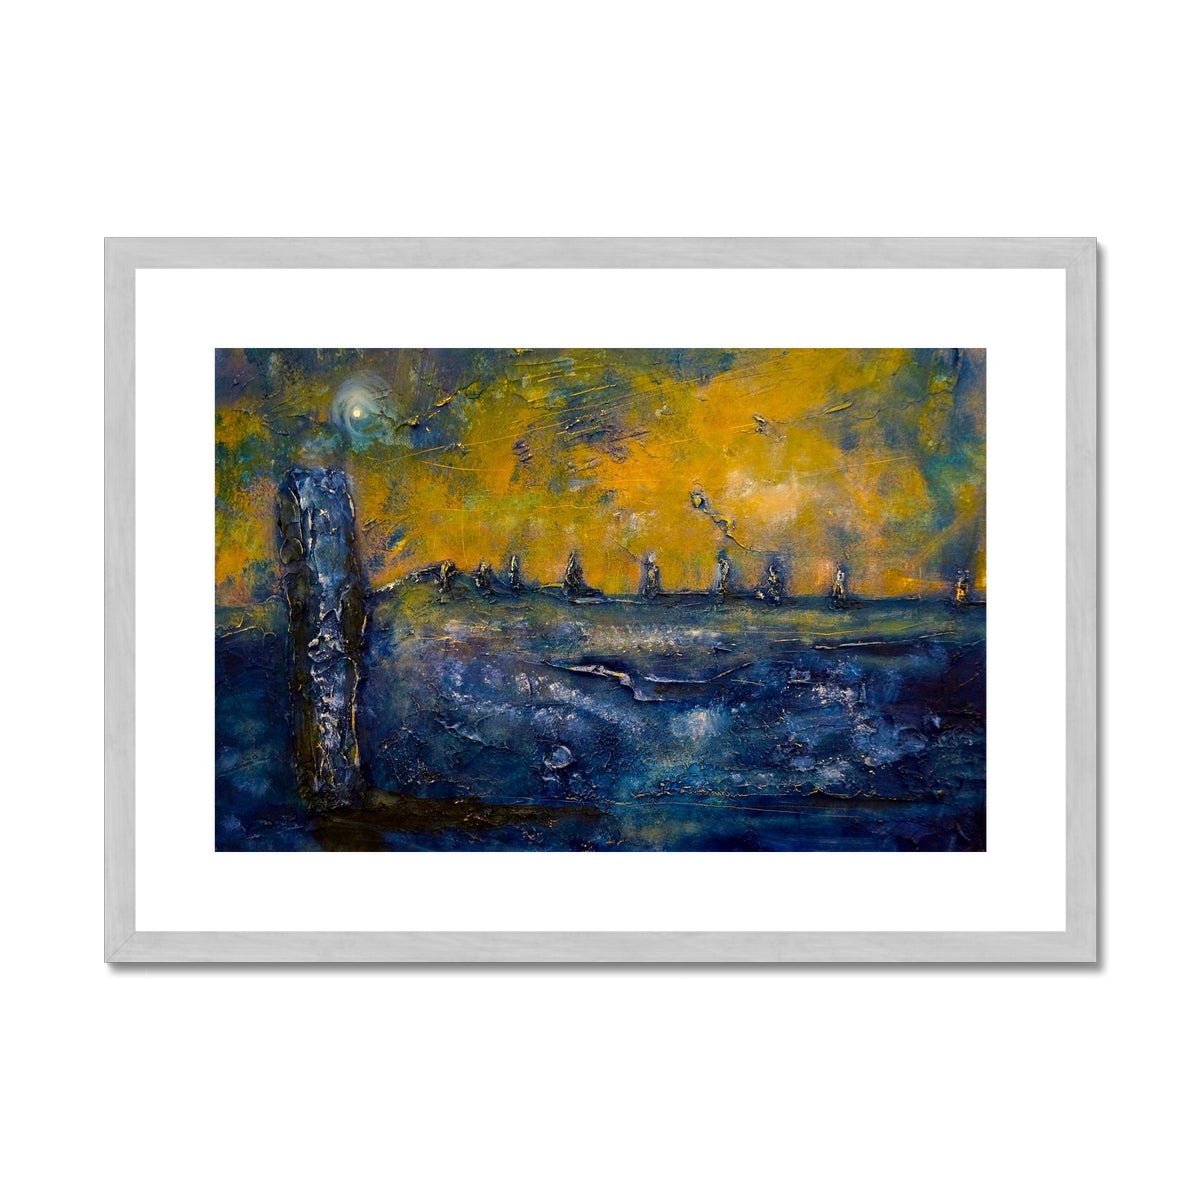 Brodgar Moonlight Orkney Painting | Antique Framed & Mounted Prints From Scotland-Antique Framed & Mounted Prints-Orkney Art Gallery-A2 Landscape-Silver Frame-Paintings, Prints, Homeware, Art Gifts From Scotland By Scottish Artist Kevin Hunter